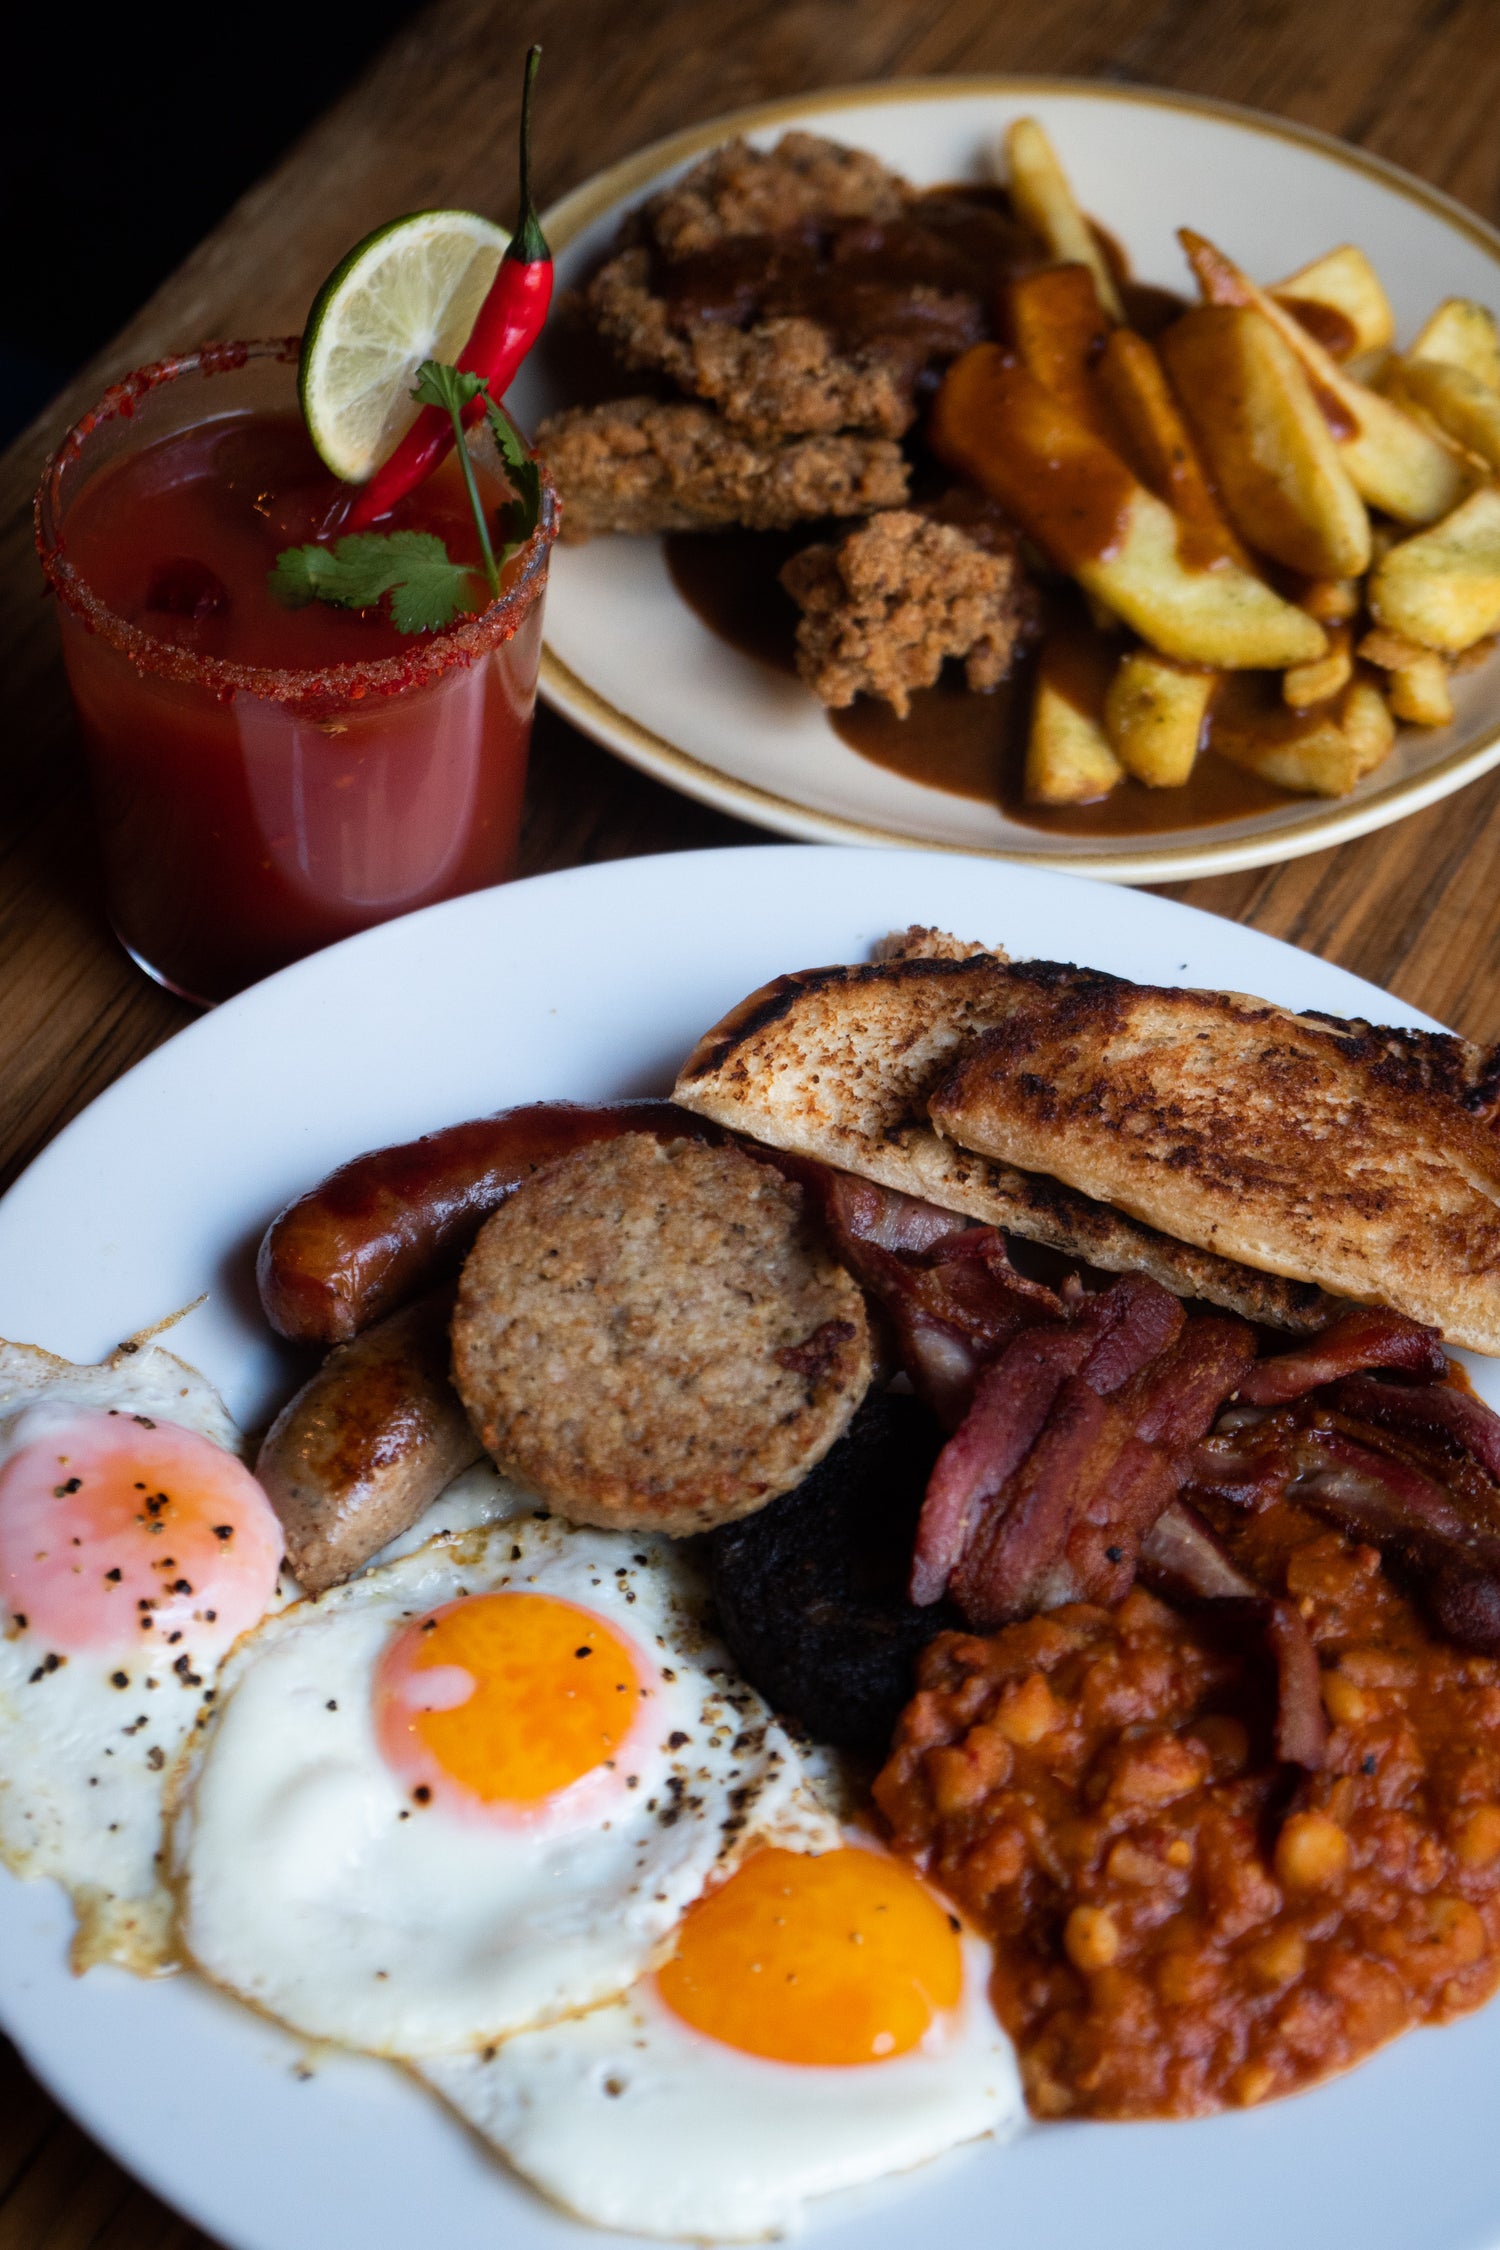 Fried eggs, baked beans, black & white pudding, bacon, toasts